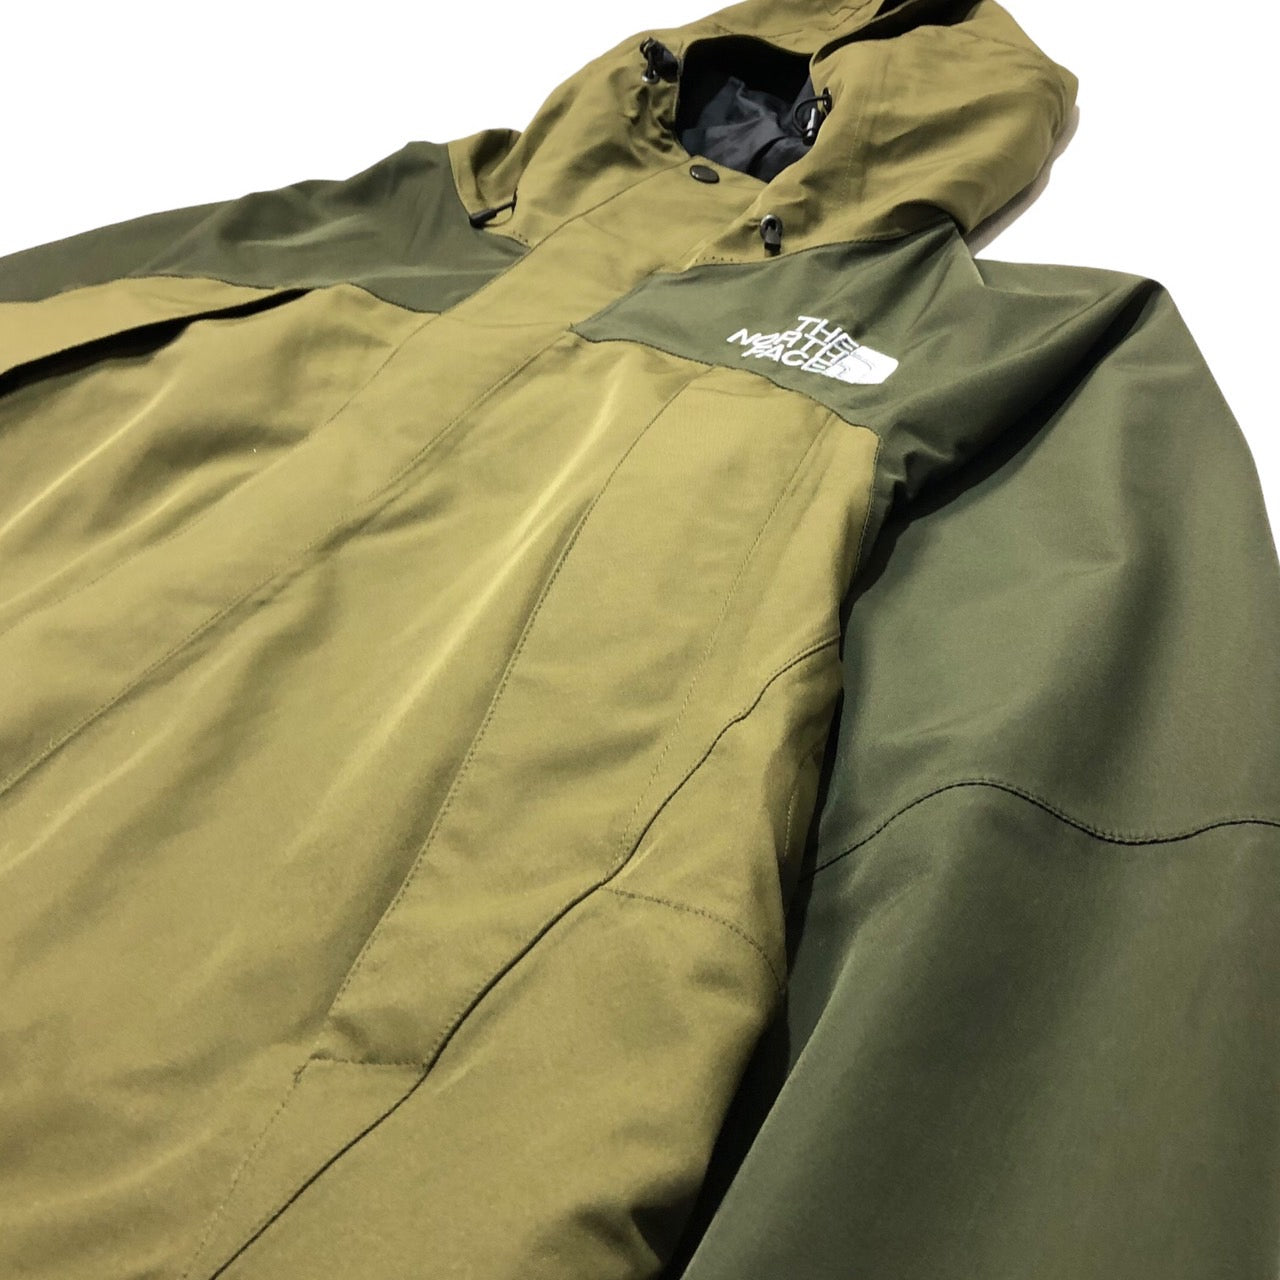 THE NORTH FACE(ザノースフェイス) GORE-TEX PRO SHELL MOUNTAIN